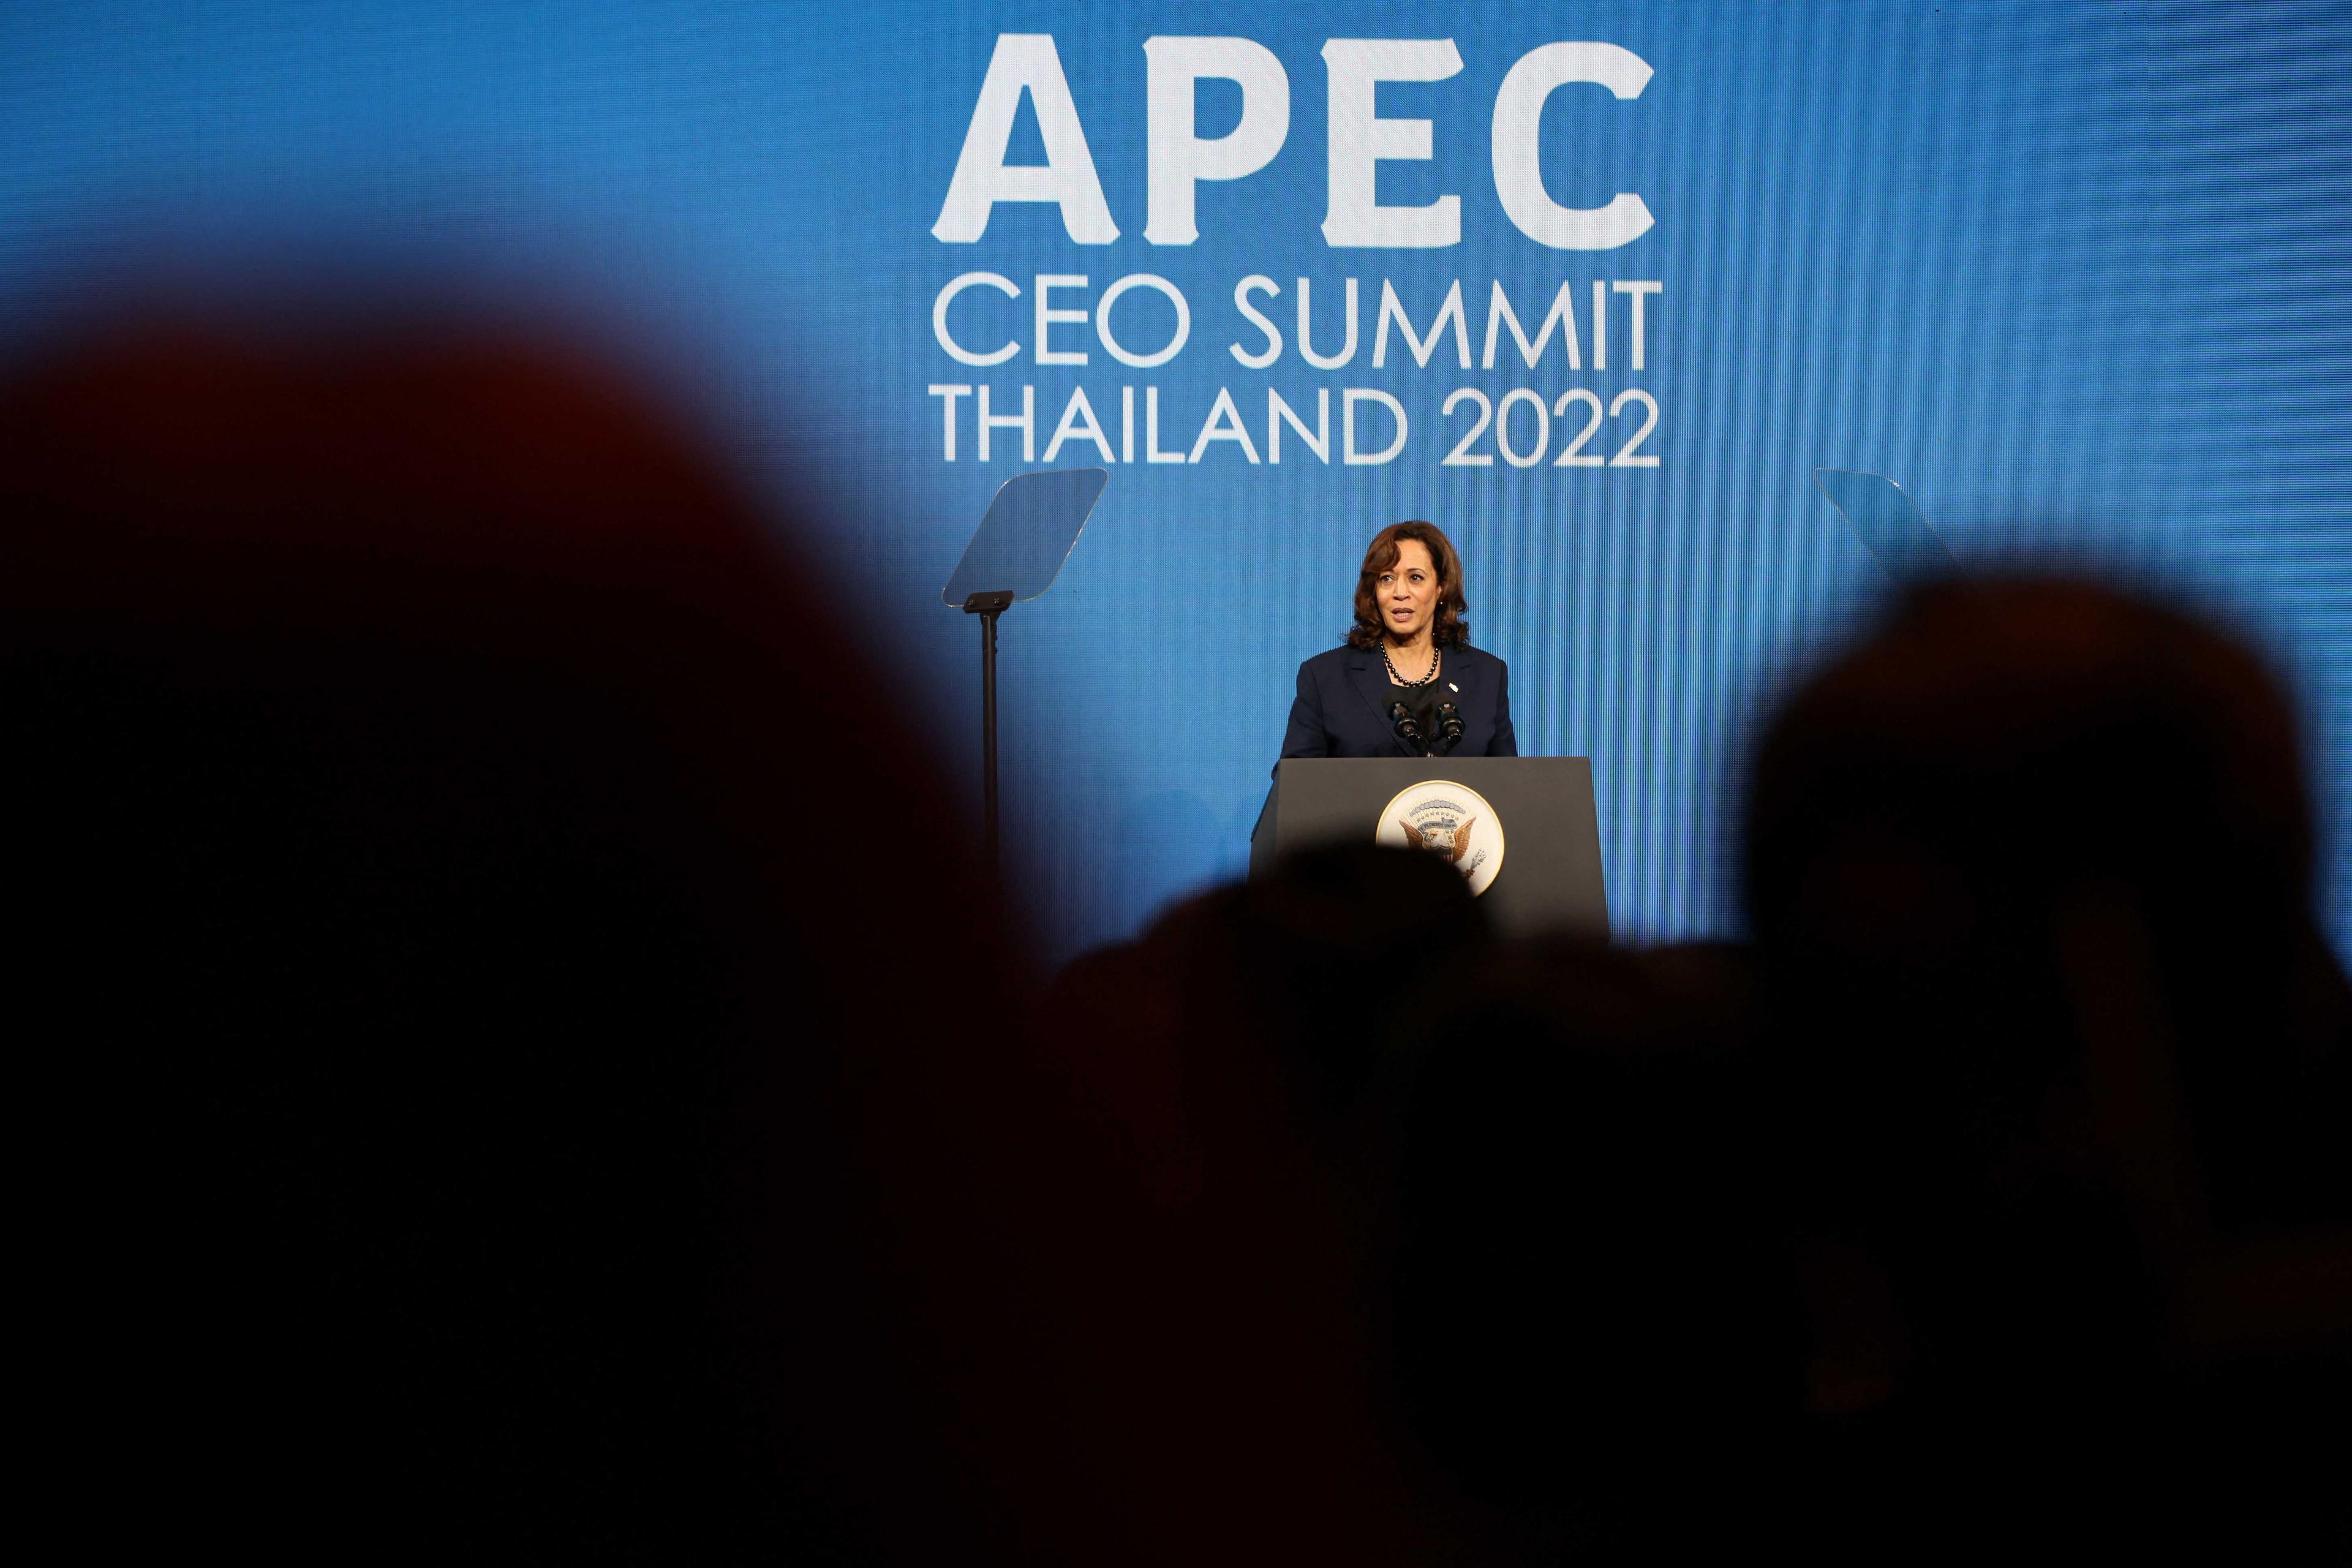 US Vice President Kamala Harris addresses the Apec CEO Summit during the Asia-Pacific Economic Cooperation Summit in Bangkok, Thailand on Nov 18. Photo: Reuters